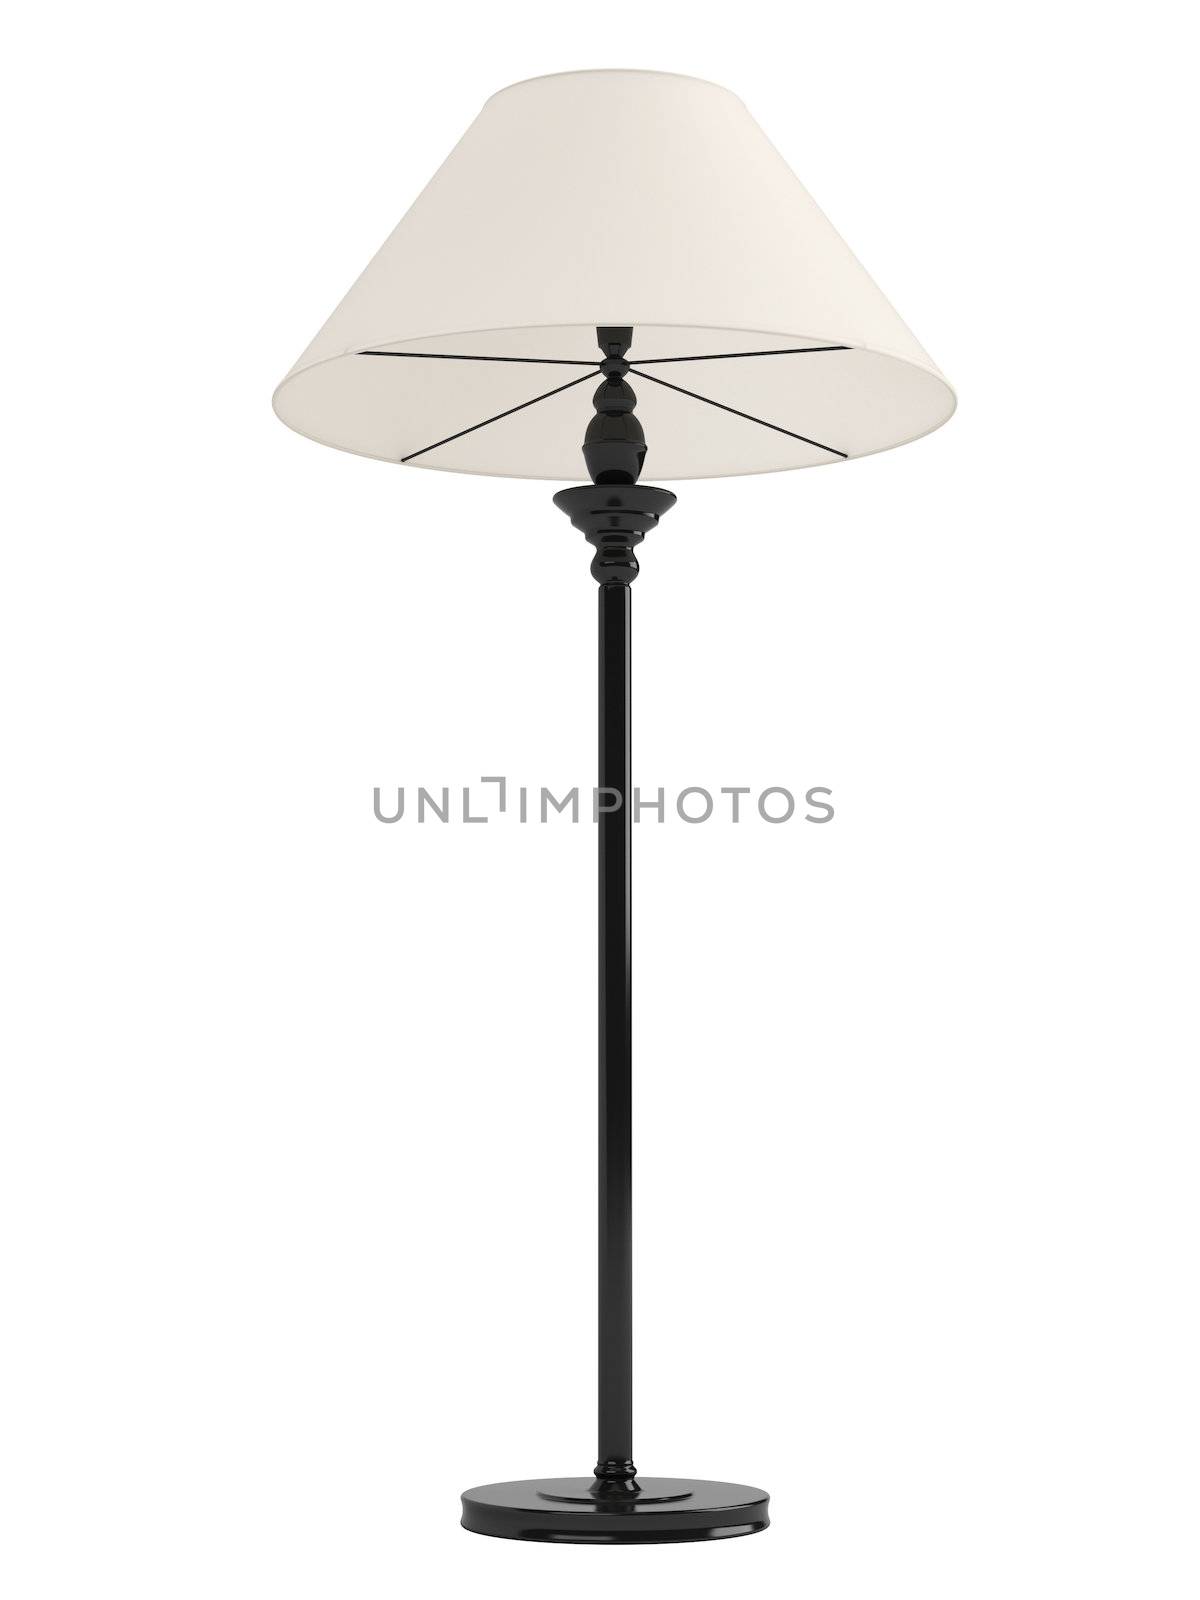 Classic standing lamp by AlexanderMorozov